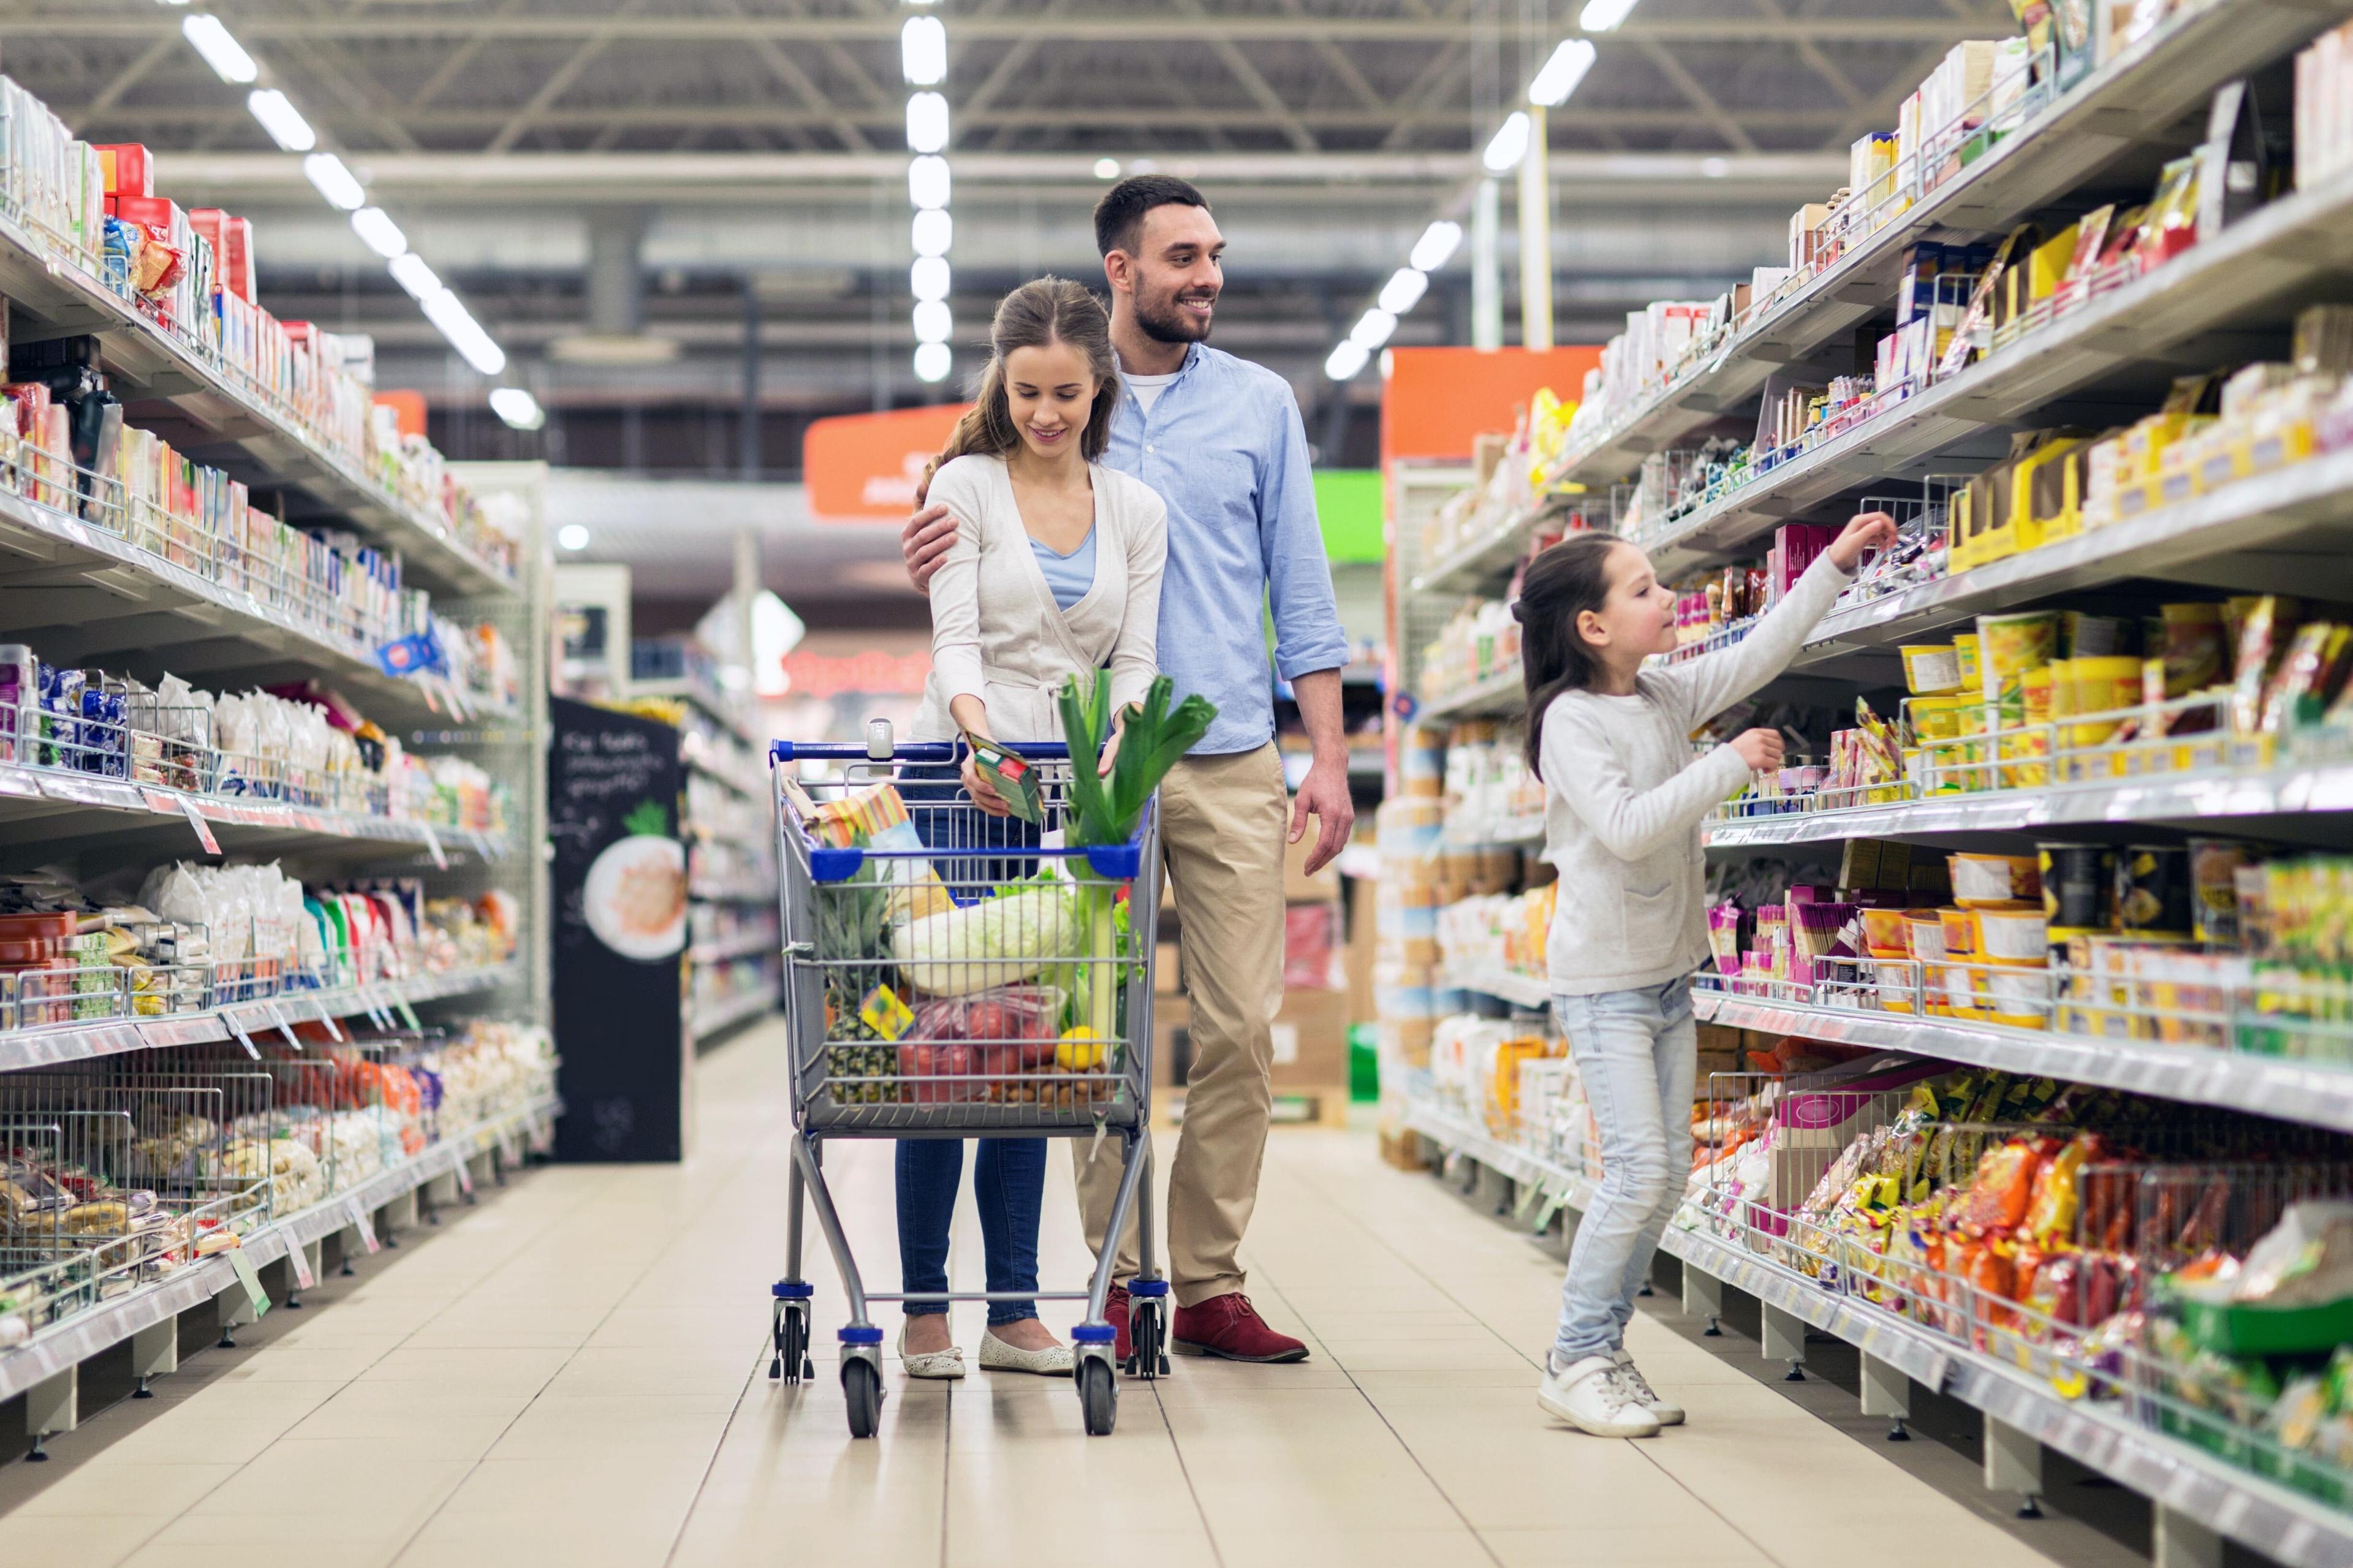 A family pushes a cart down the aisle of a grocery store.